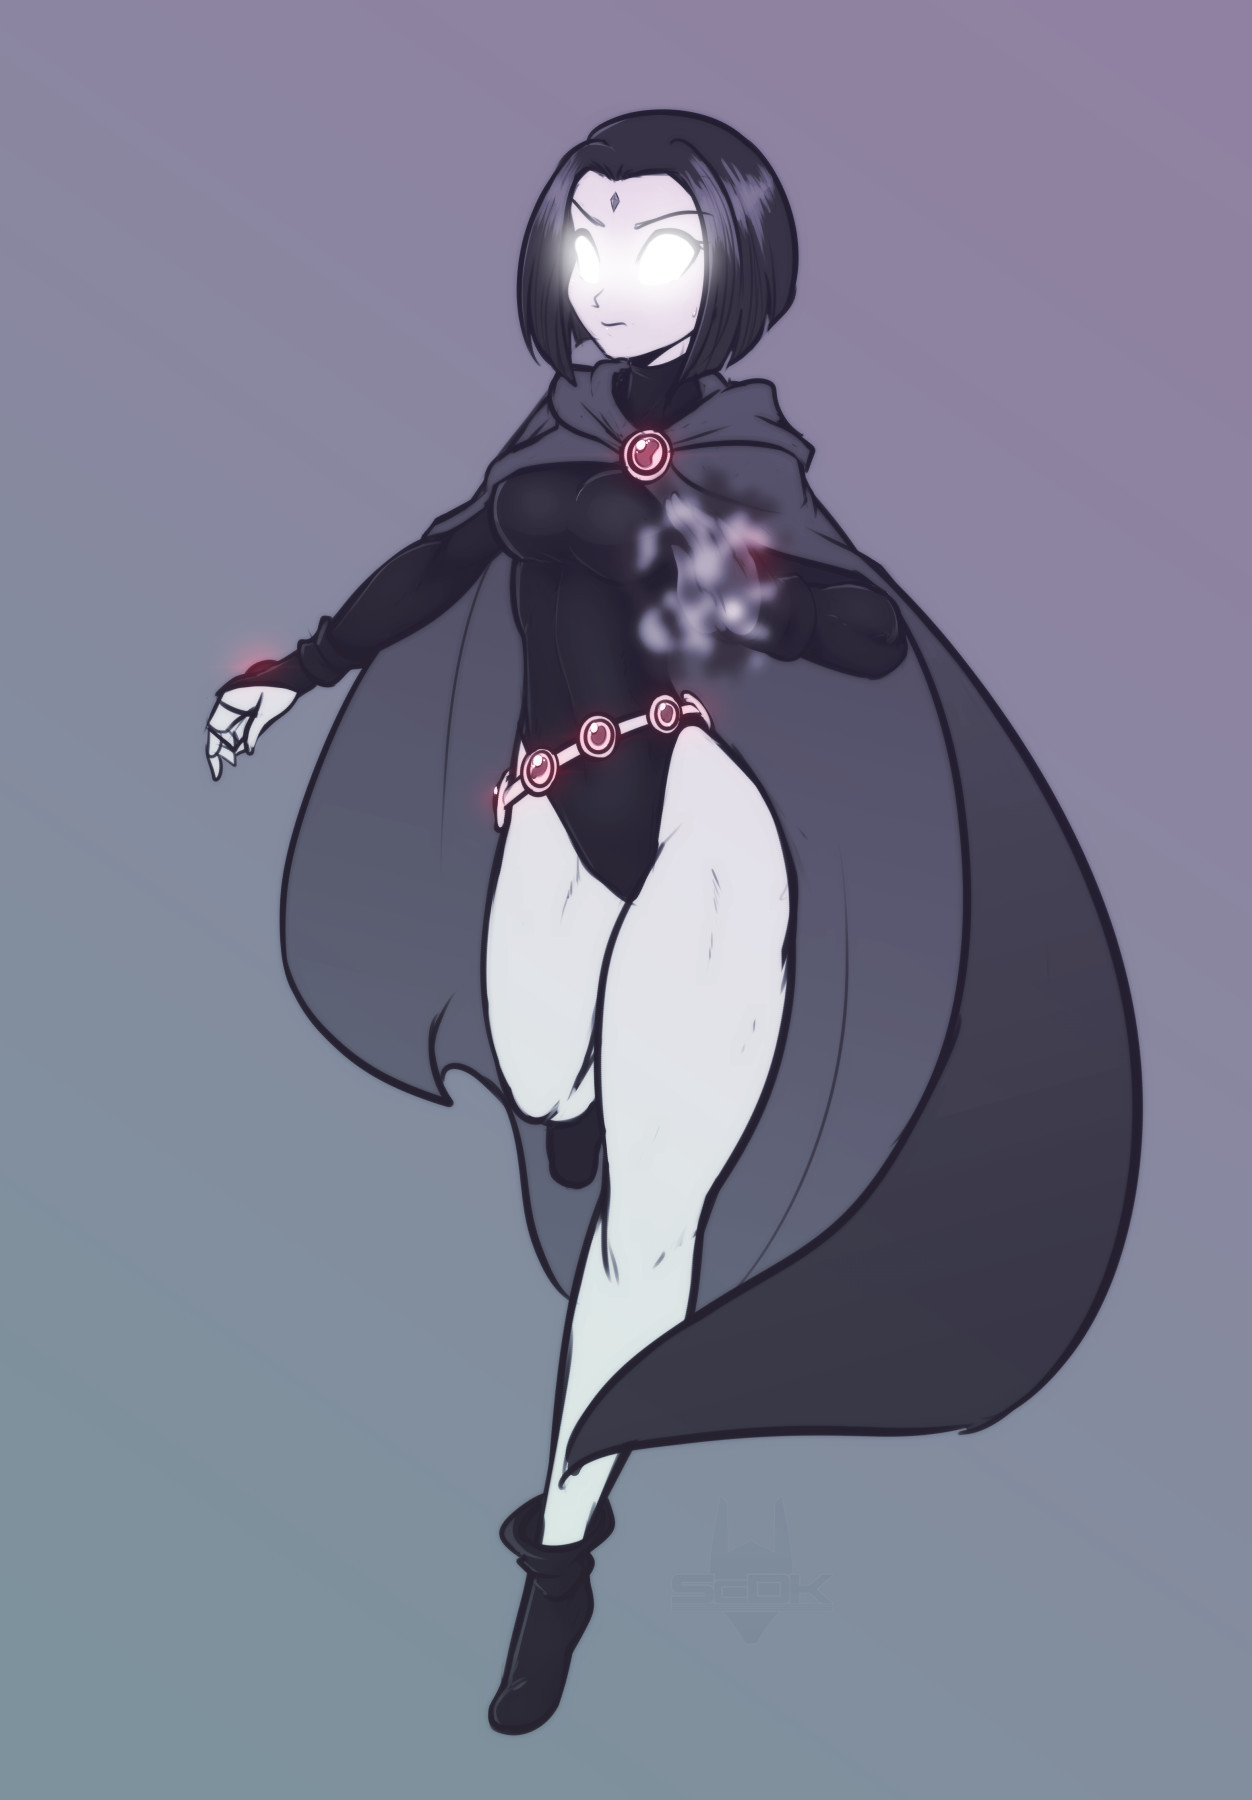 scdk-nsfw: scdk-nsfw:  scdk-sfw:  Doodle - Raven If someone draws a character well